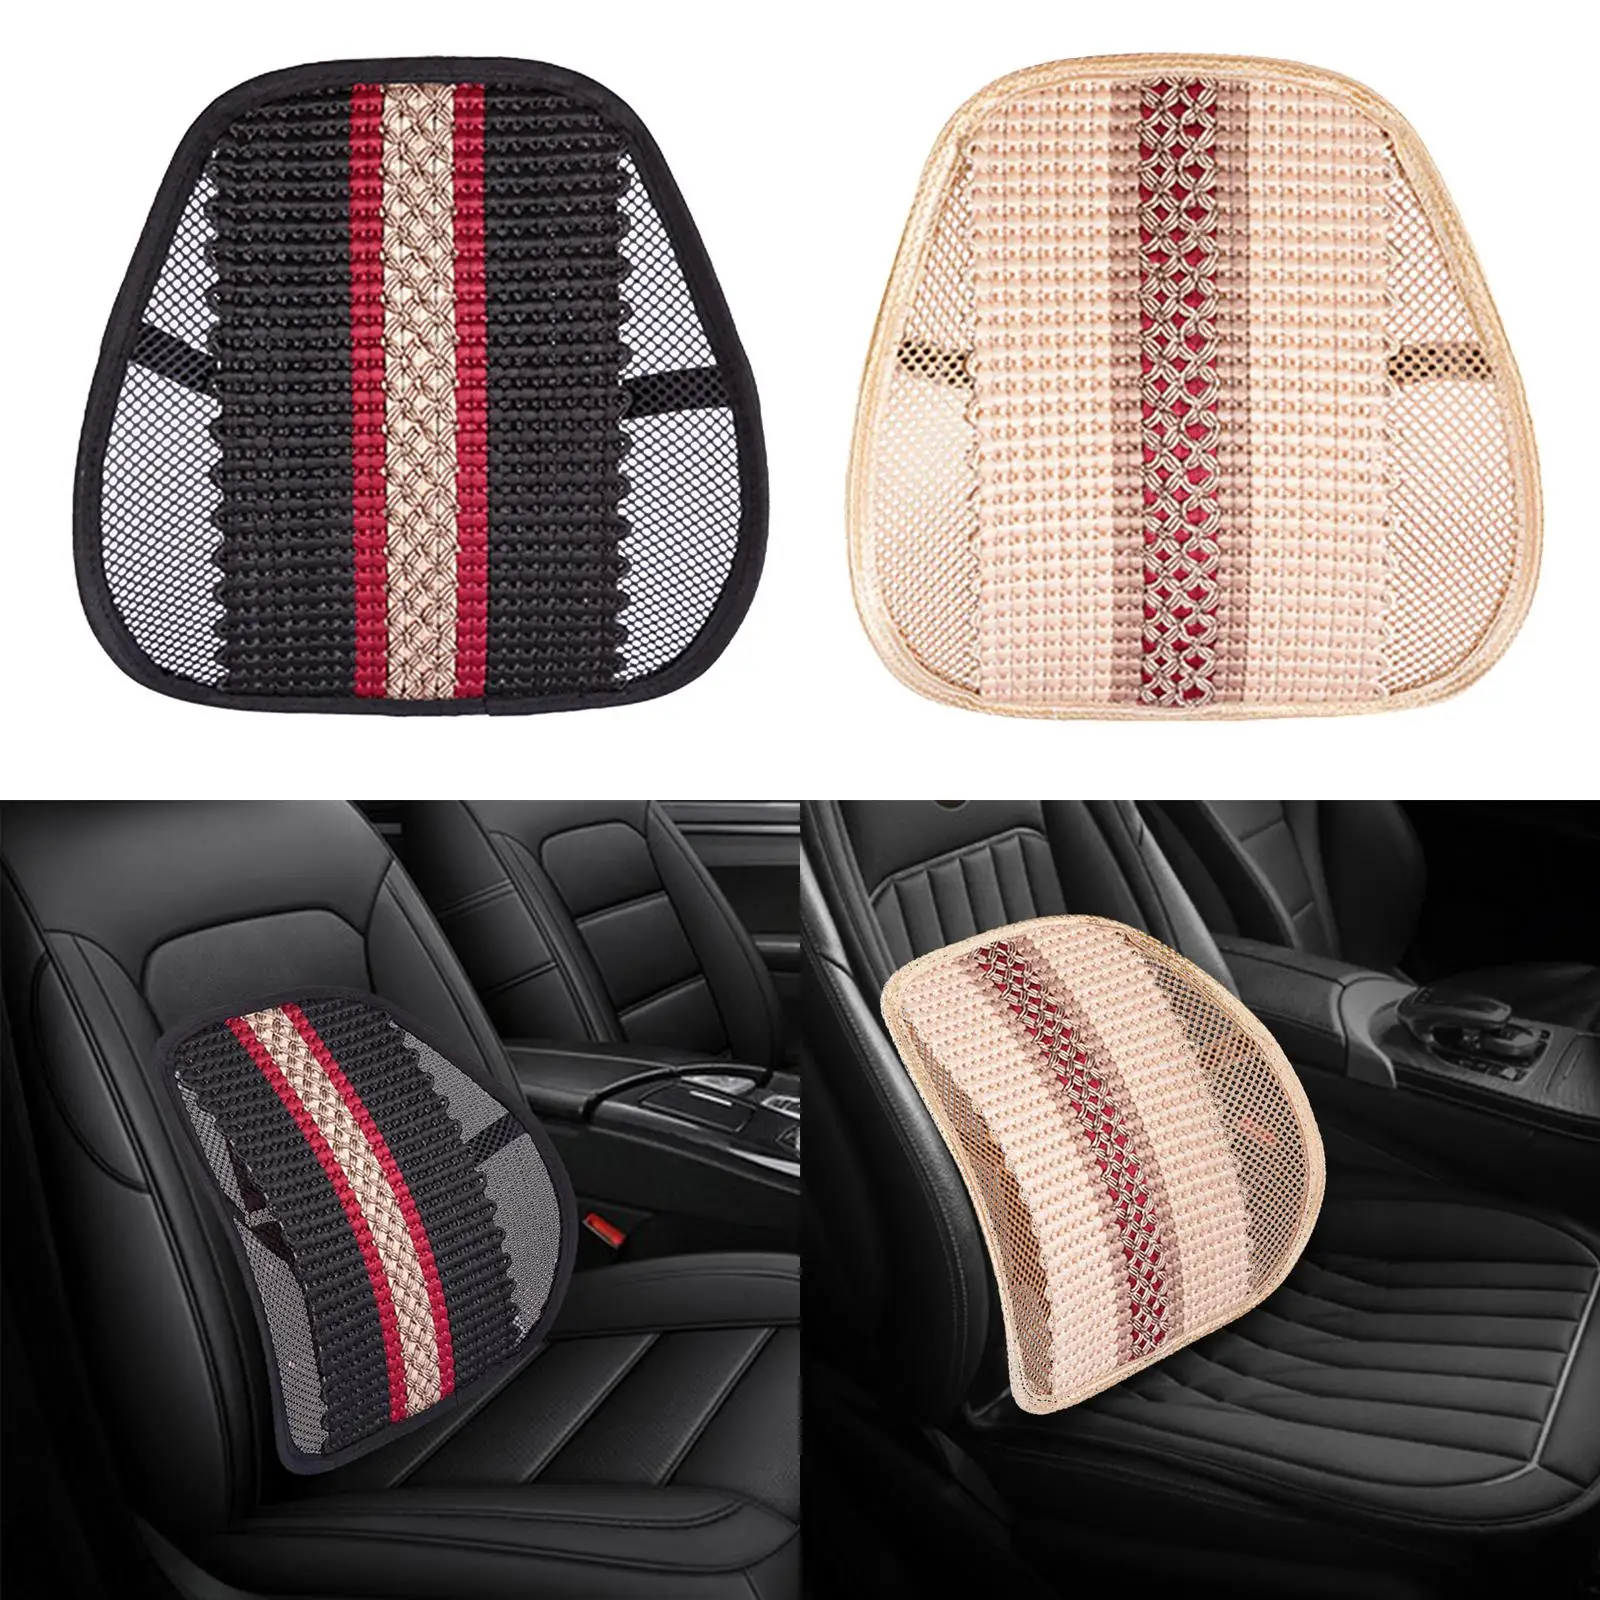 Mesh Back Lumbar Support with Breathable Mesh with Elastic Strap Back Rest Cushion Car Back Support for Car Home Office Chair